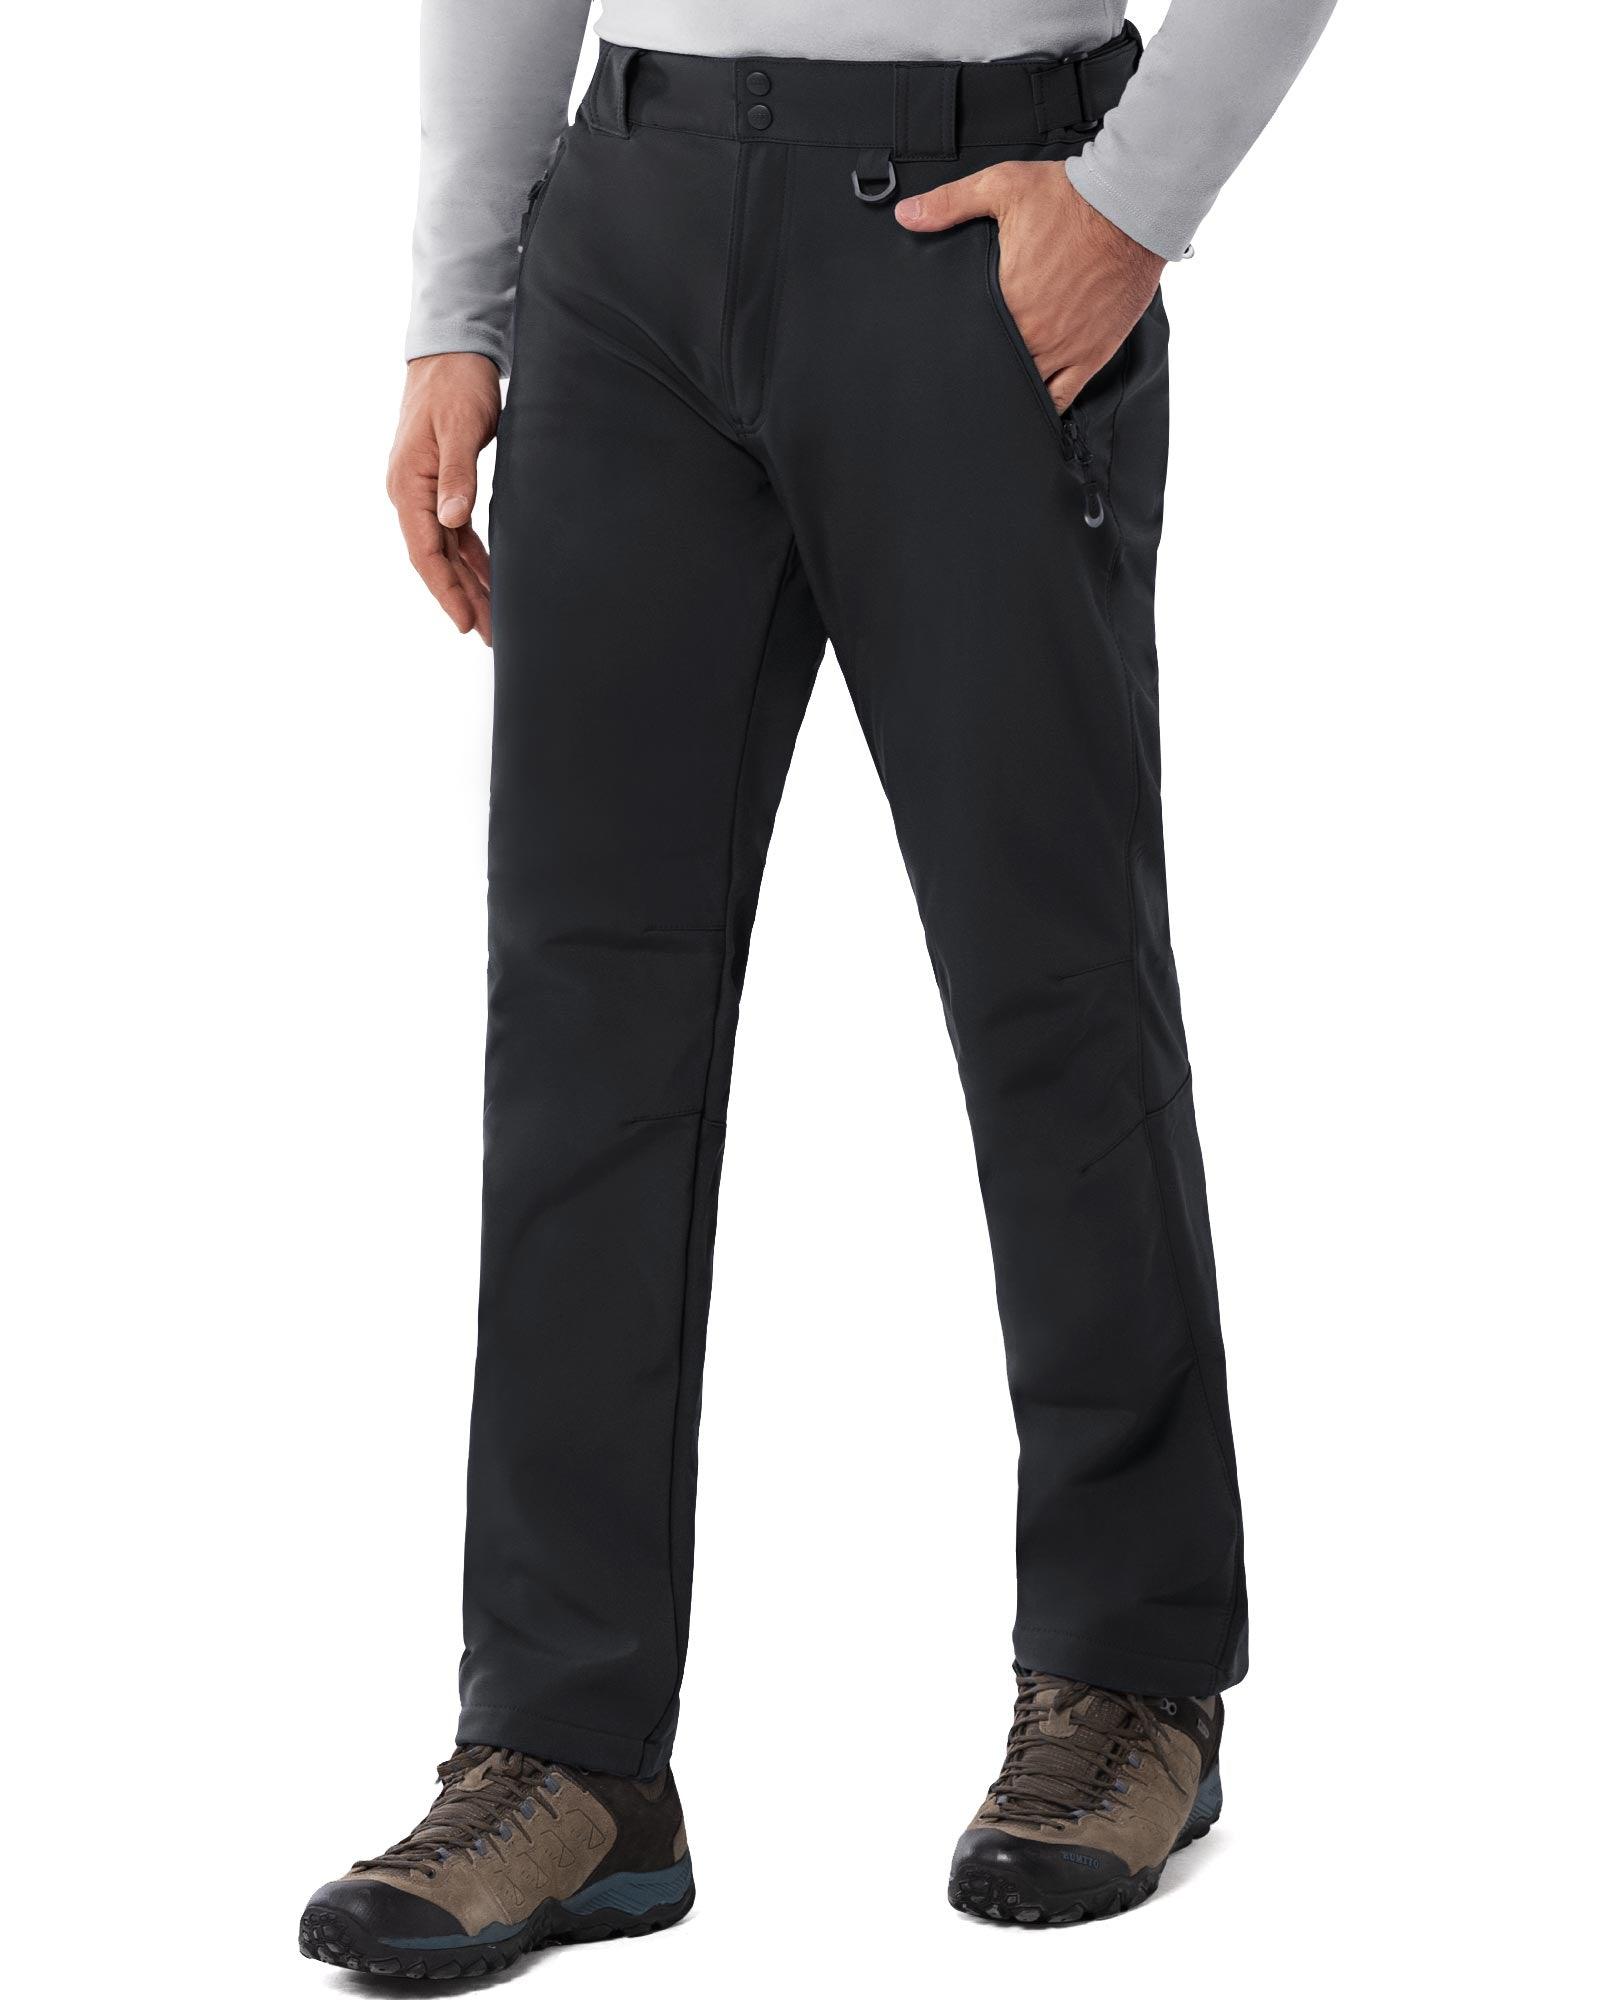 8000mm W/P Index Men's Snow Fleece Lined Pants with 4 Pockets and Adju –  33,000ft